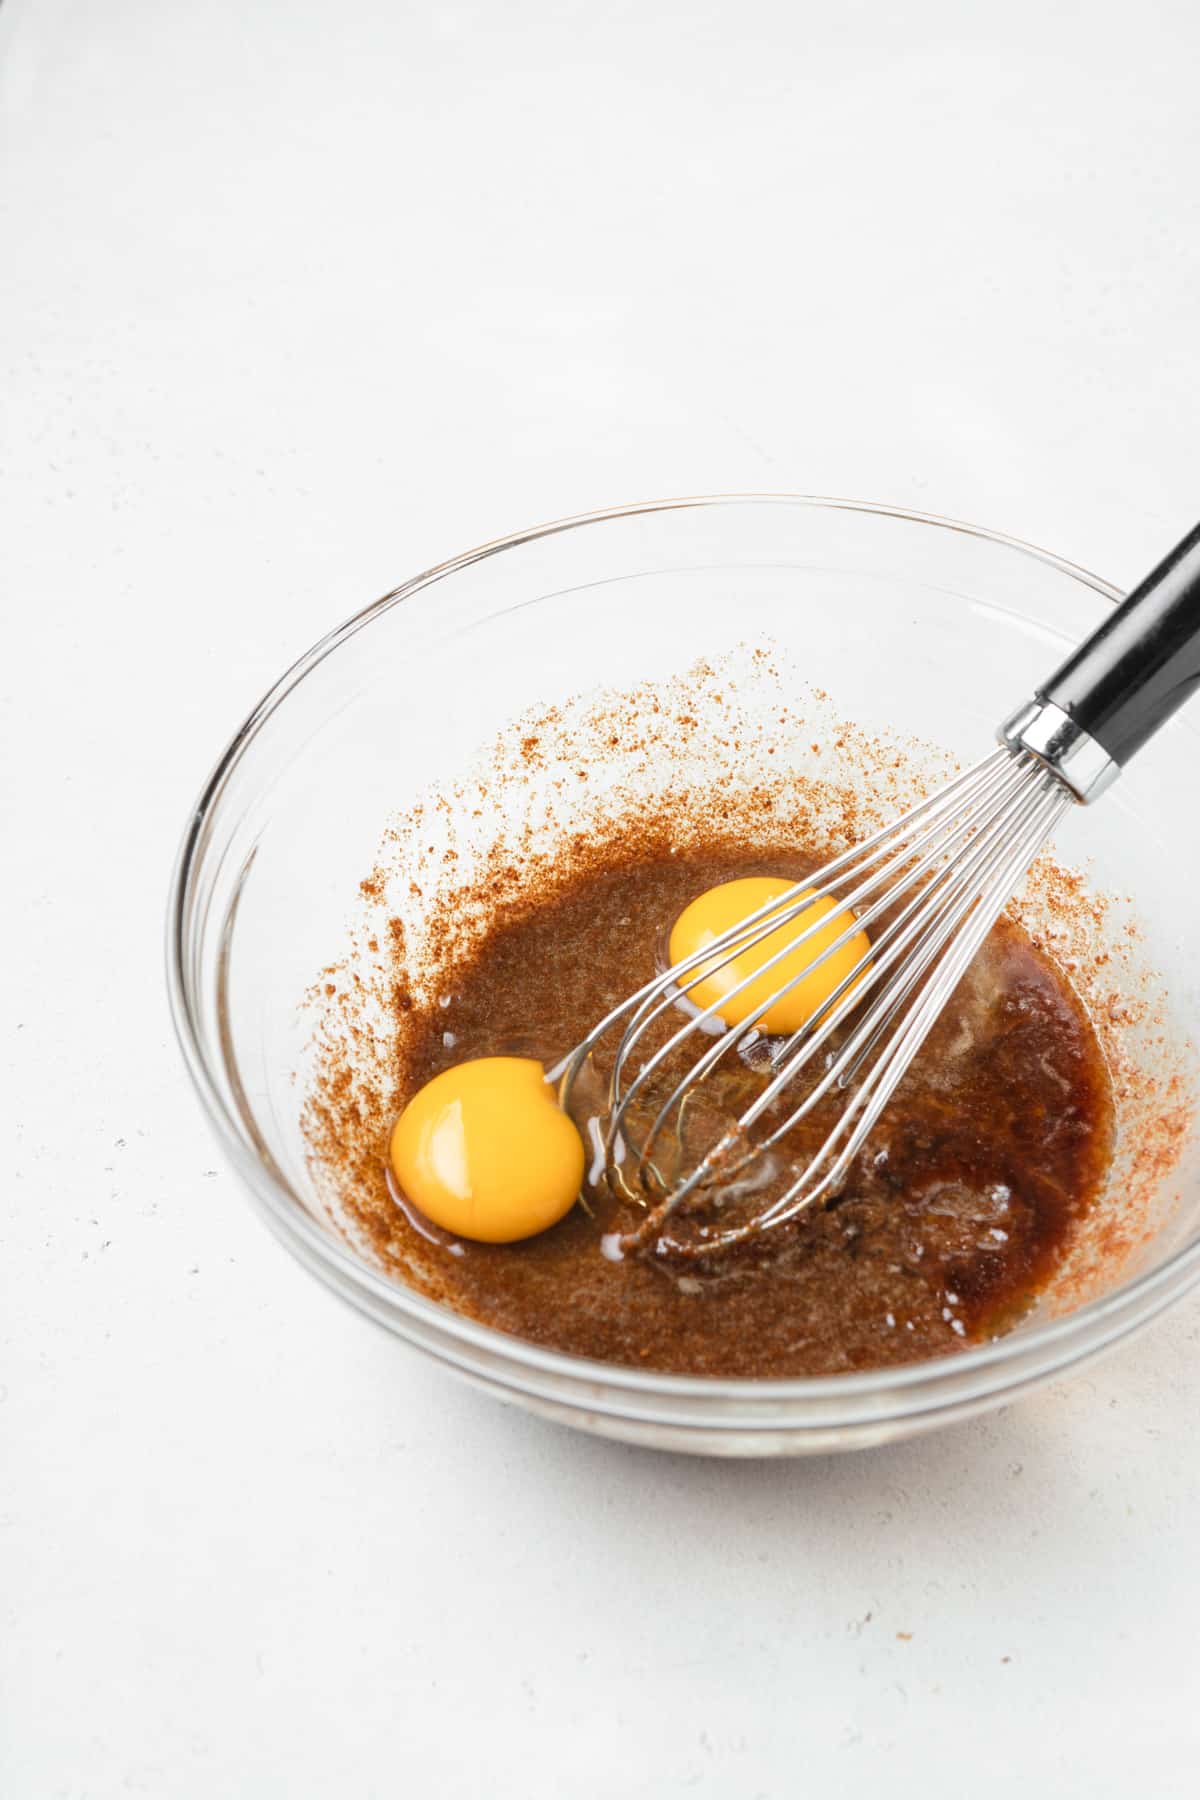 Eggs in a bowl of coconut sugar and butter with a whisk.